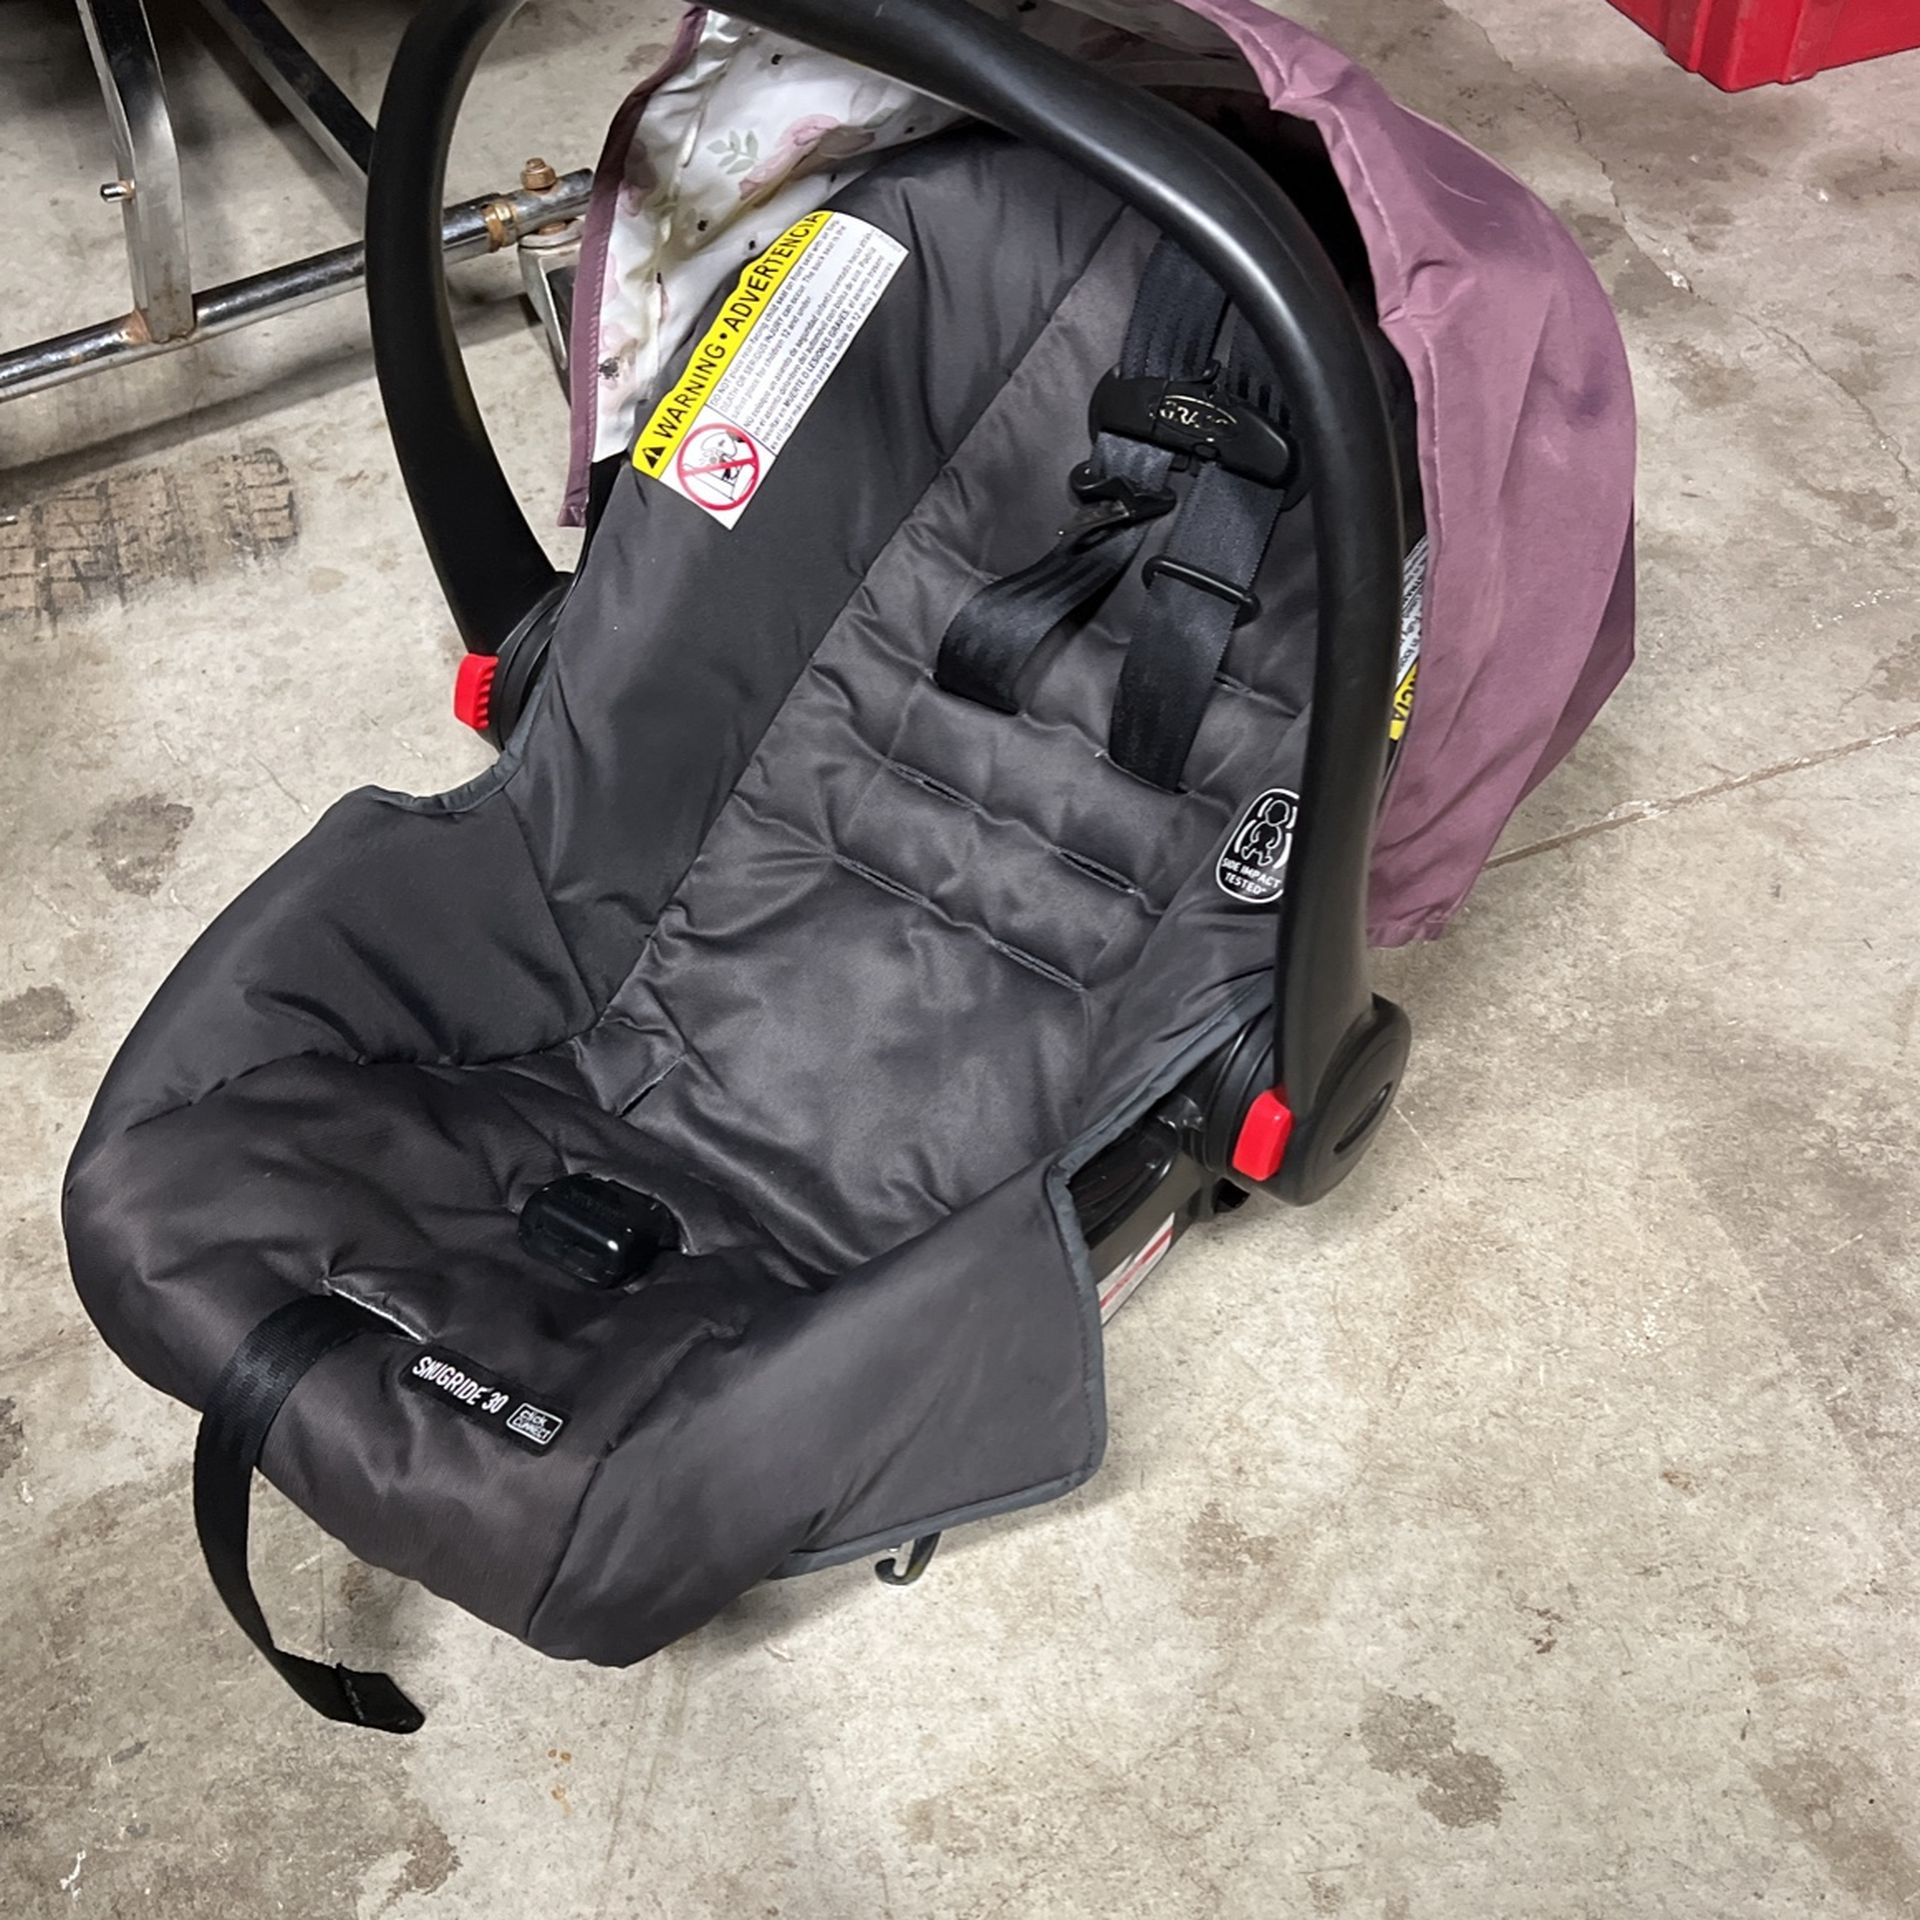 Baby Carrier Car Seat Excellent Condition/Clean 